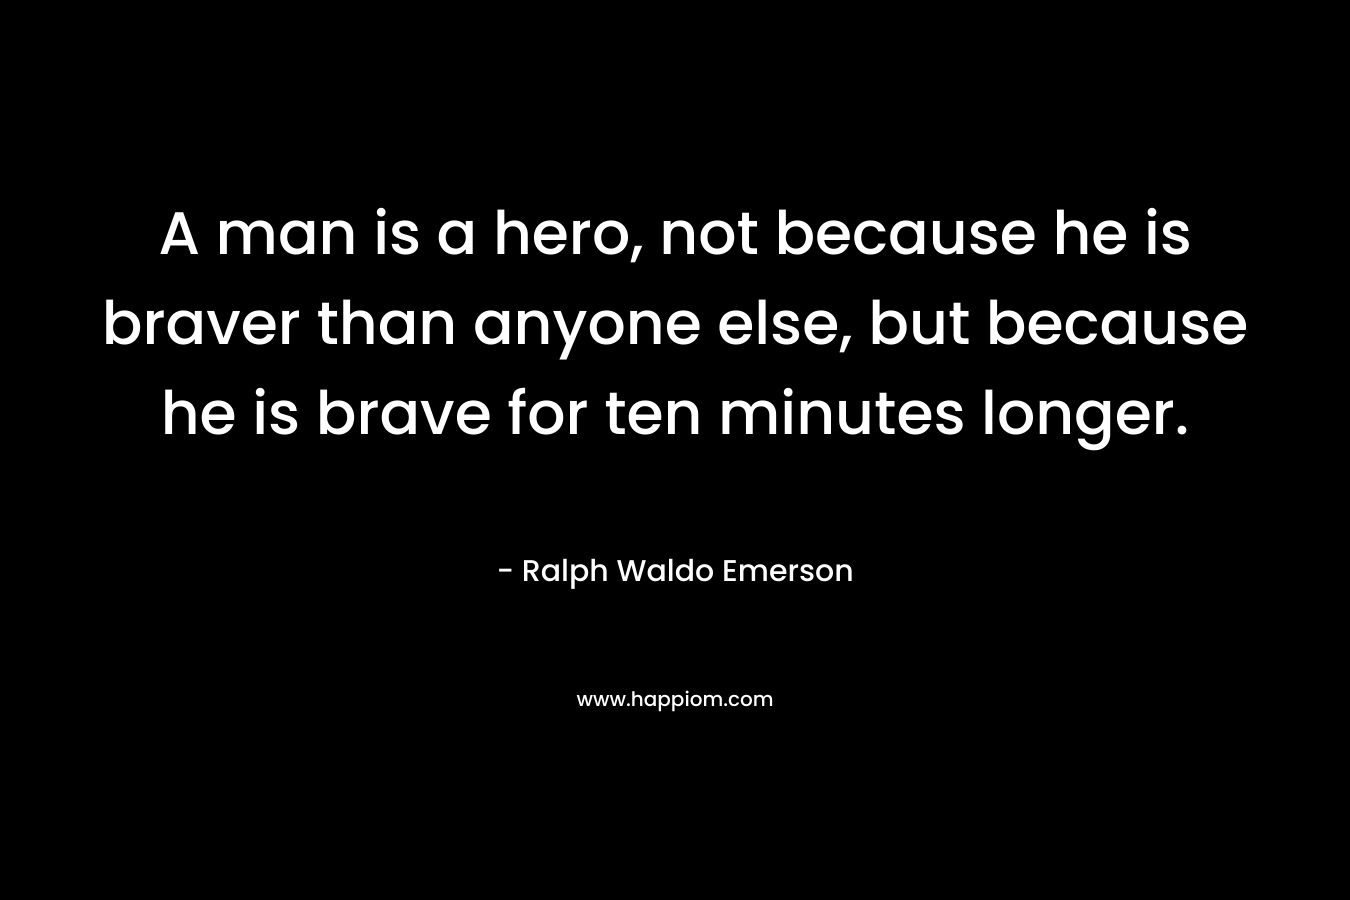 A man is a hero, not because he is braver than anyone else, but because he is brave for ten minutes longer.